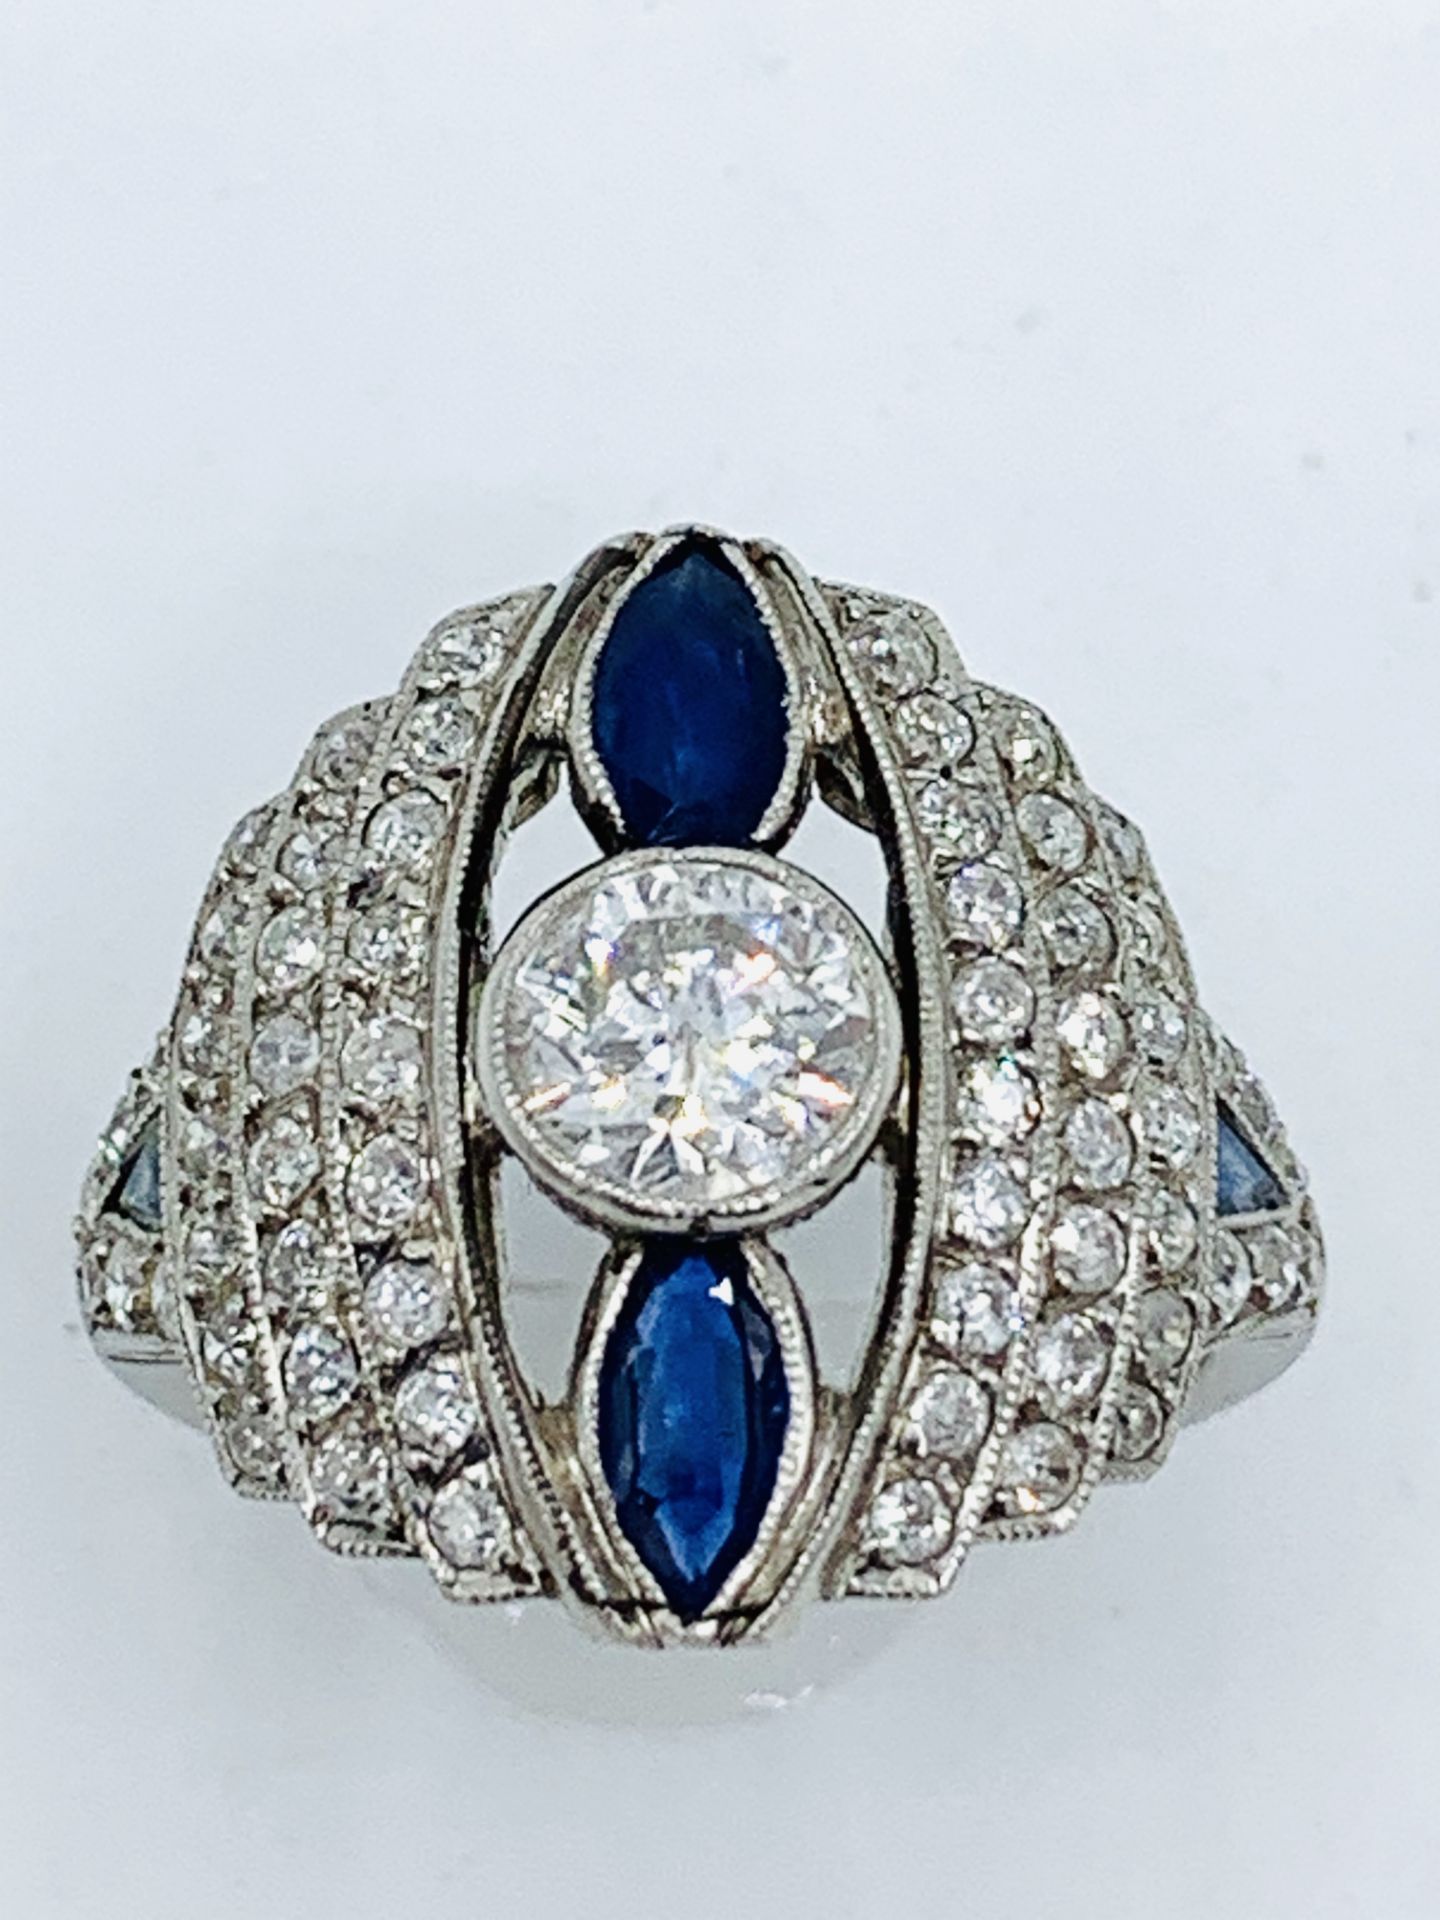 Art Deco white gold diamond and sapphire ring. Size O 1/2 Wt. 7.8gms. Size of centre diamond 6.3m - Image 6 of 7